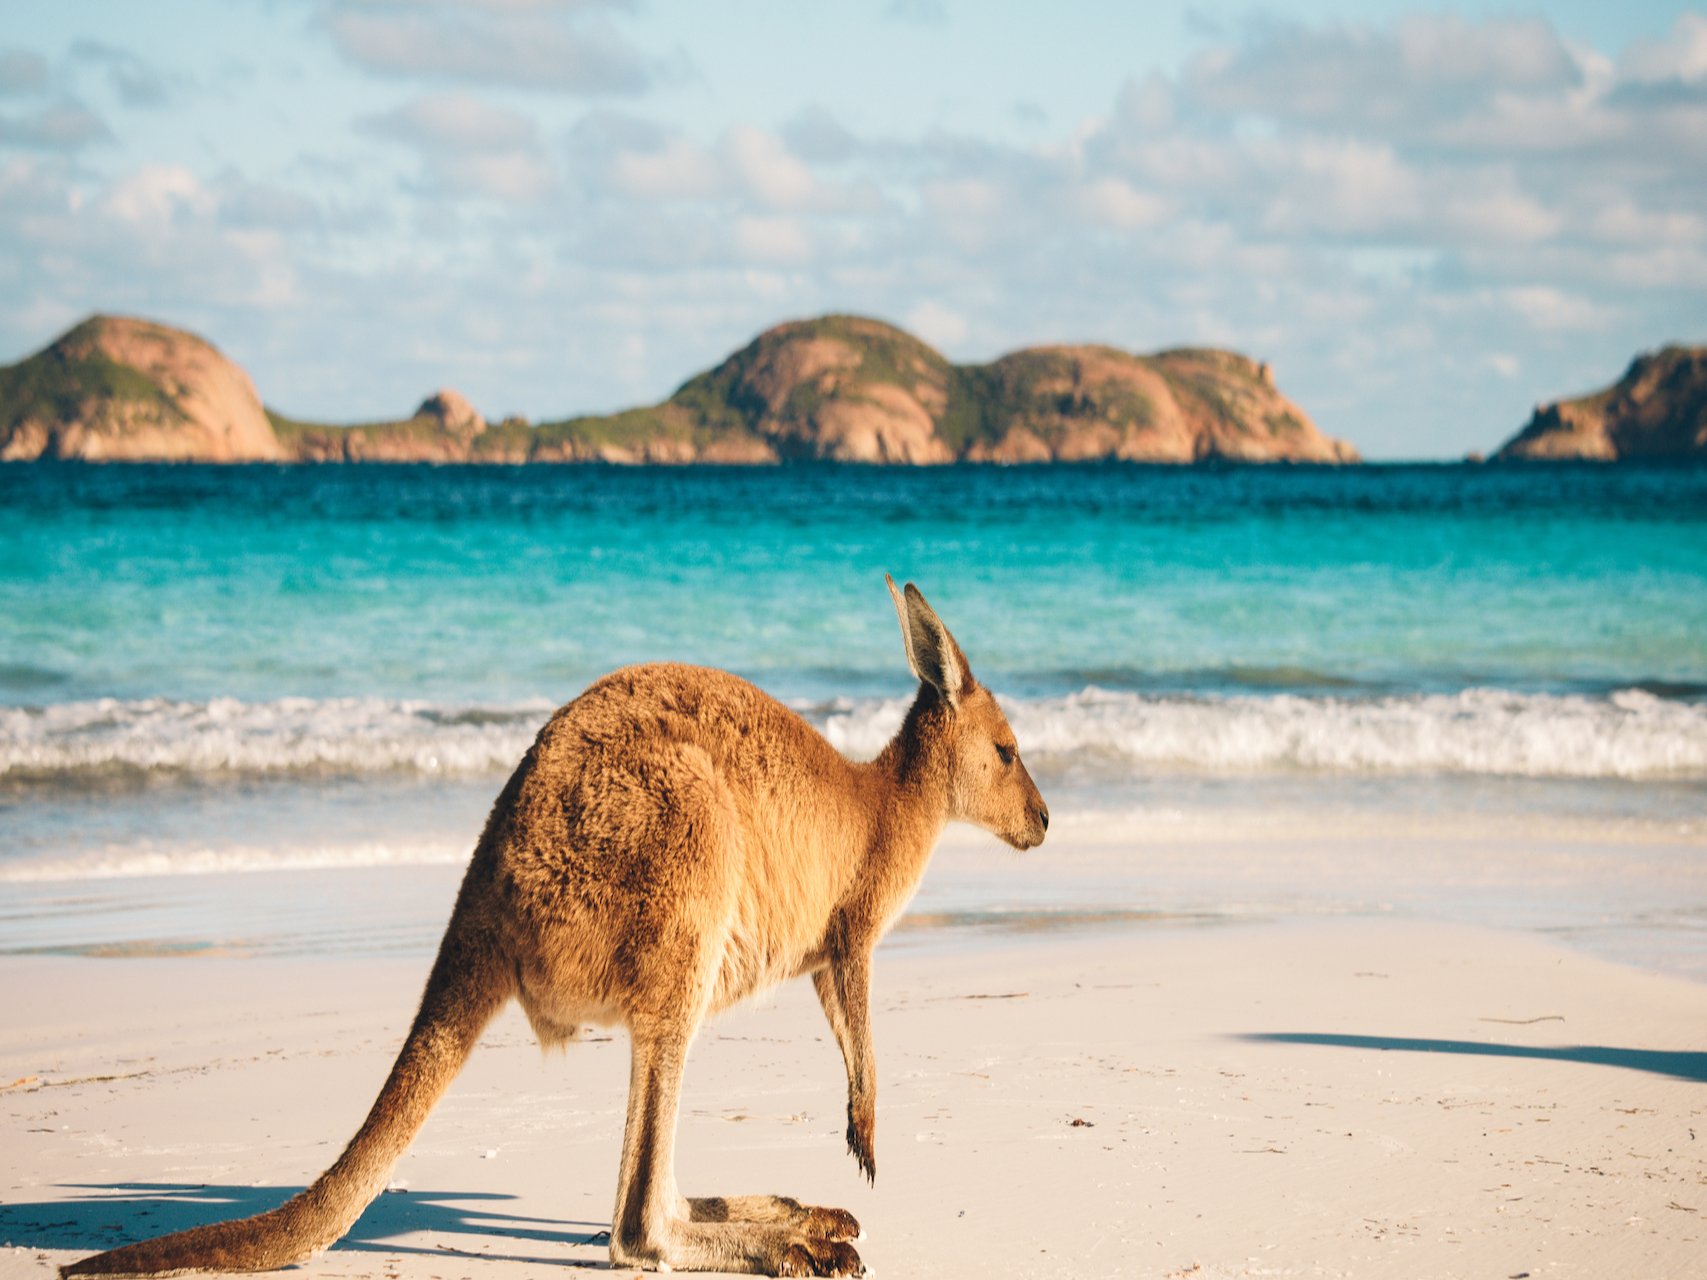 Lucky Bay: You can see kangaroos lying in this summer paradise